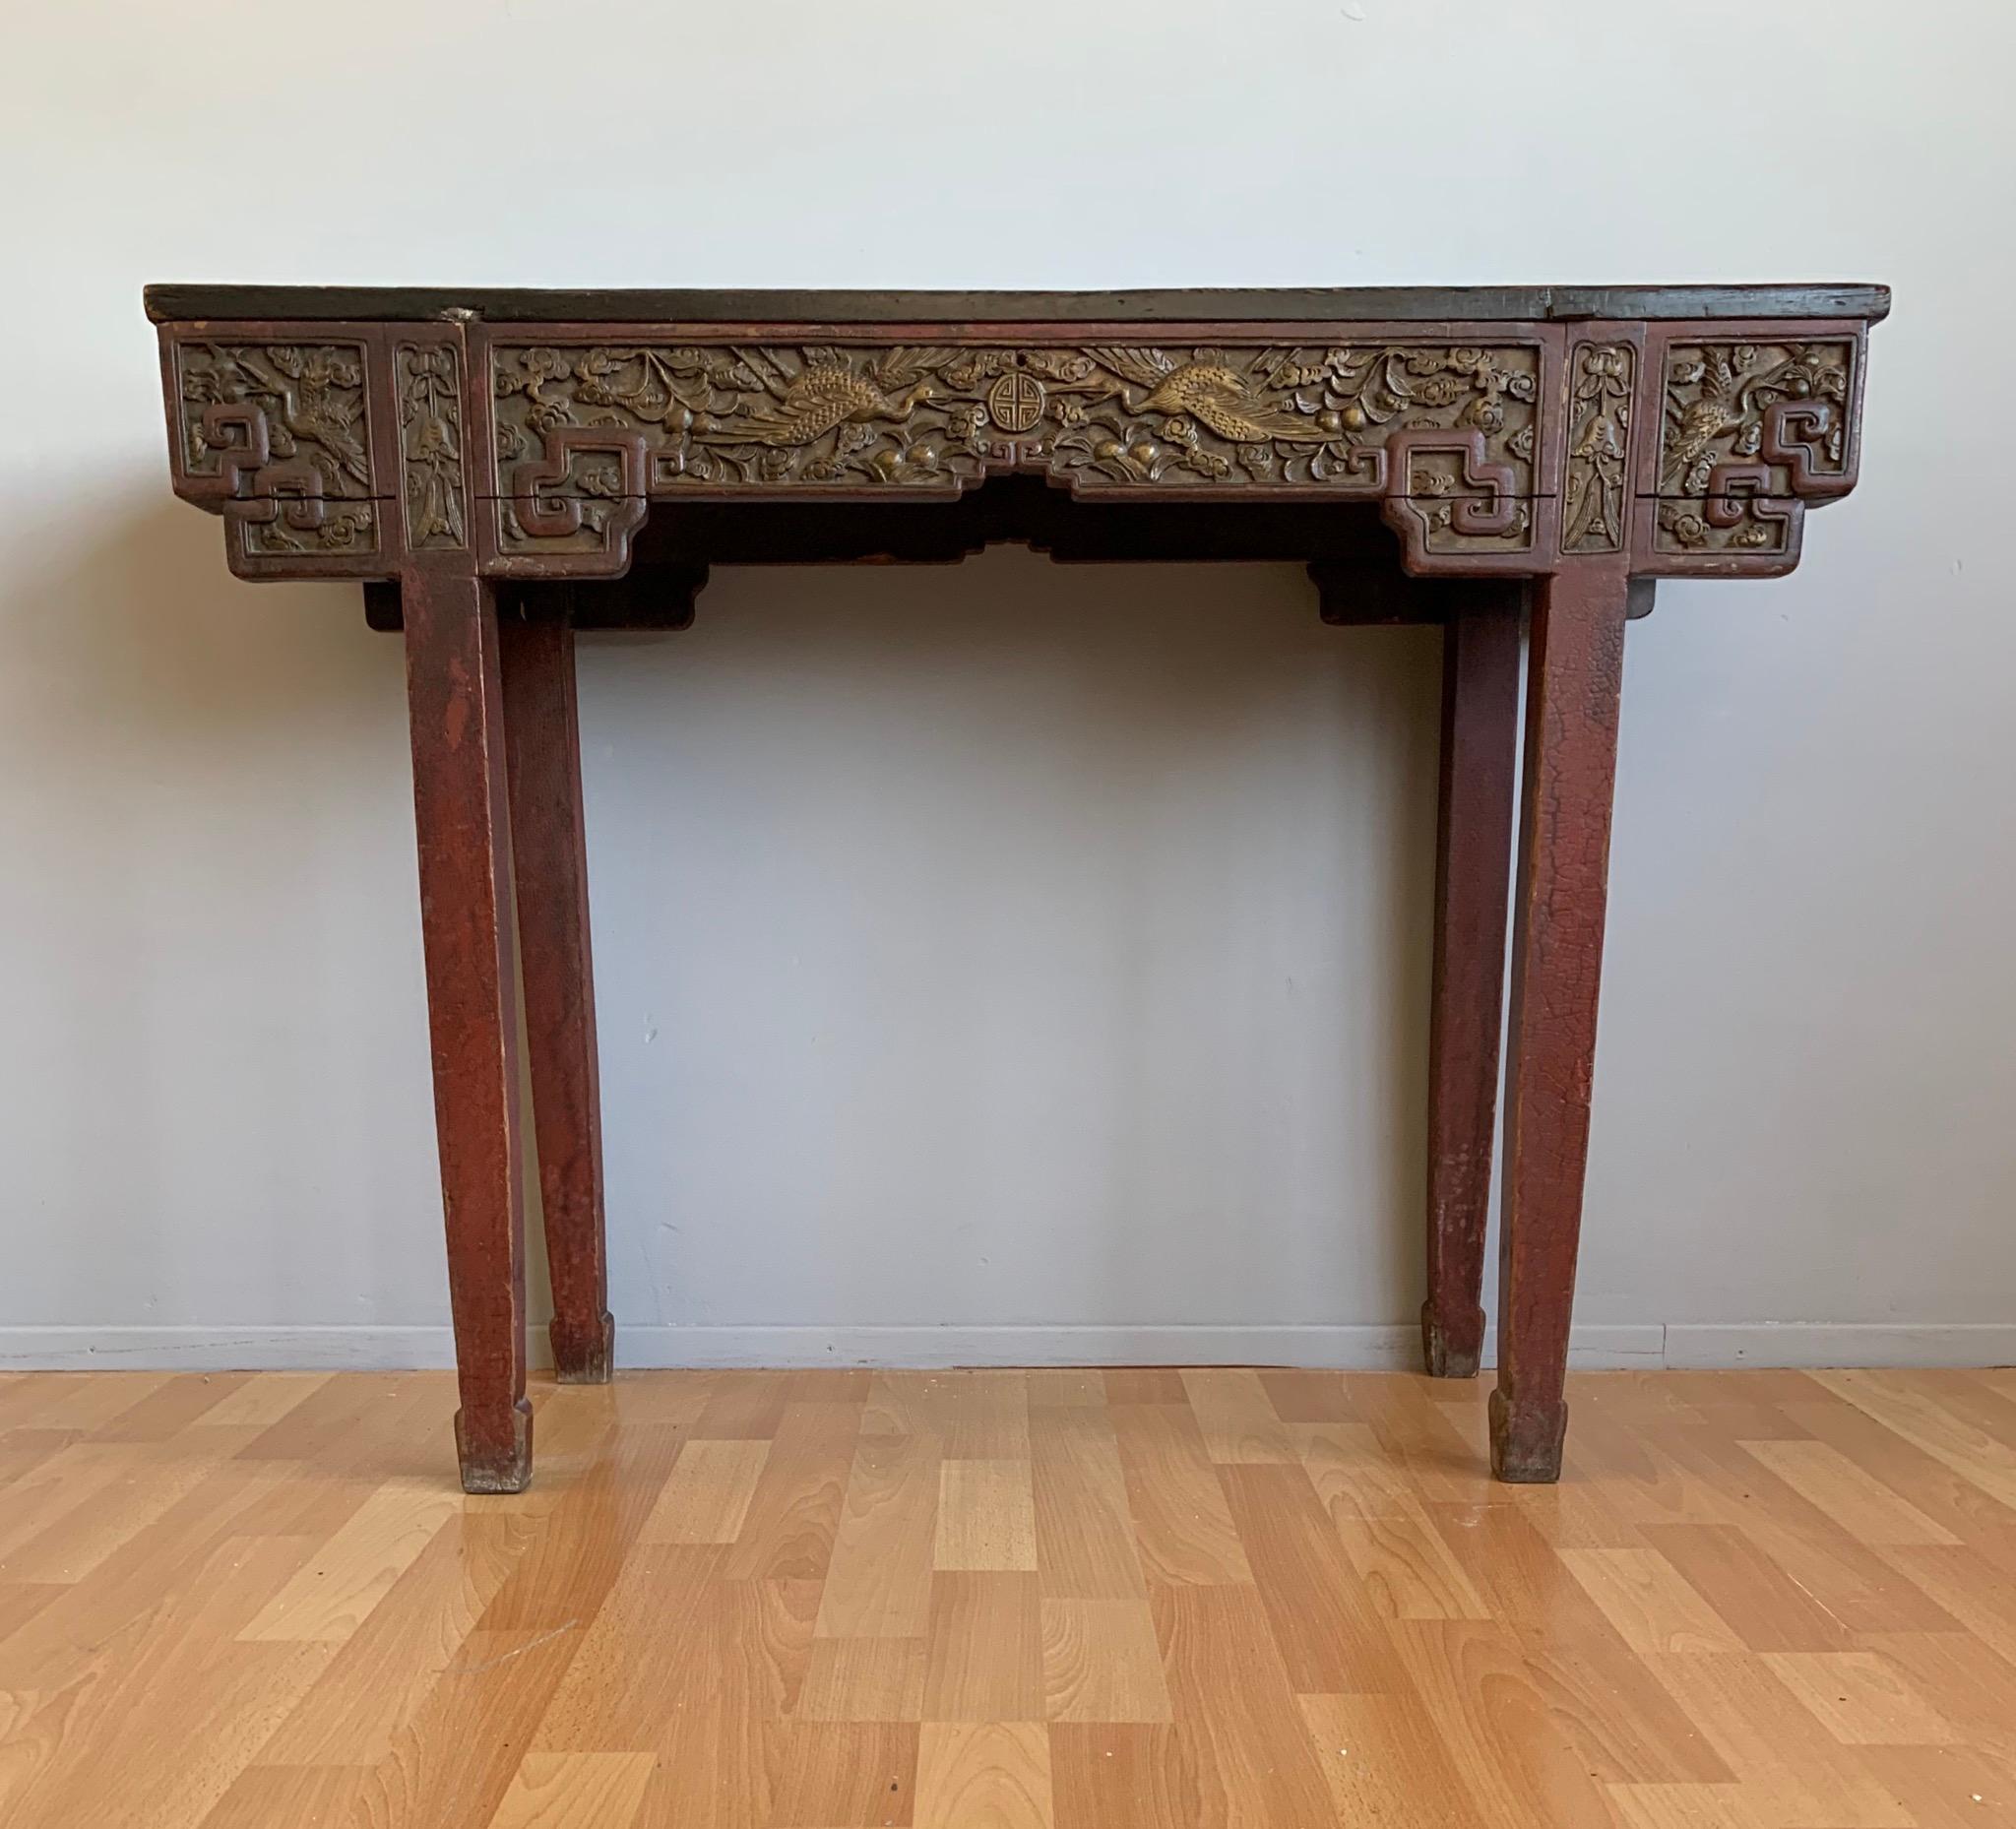 Stunning antique Asian side table with flying crane bird motifs and more on all sides.

One of the great advantages of this antique Chinese side or altar table is that it can be incorporated in all kinds of interior styles, even a contemporary